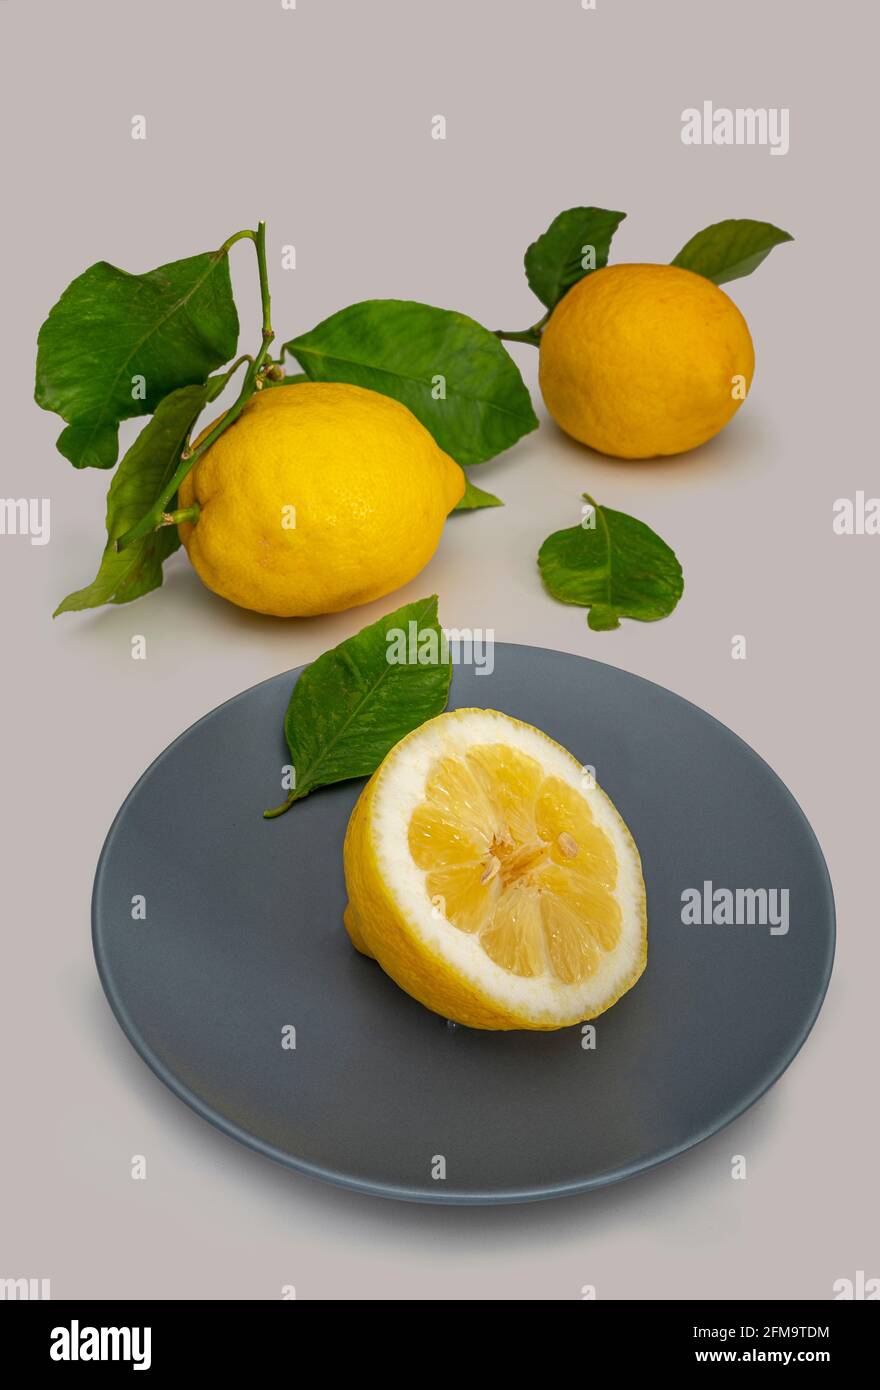 Still life of three lemons one of which is cut in half and placed on a gray plate with the light background. Stock Photo